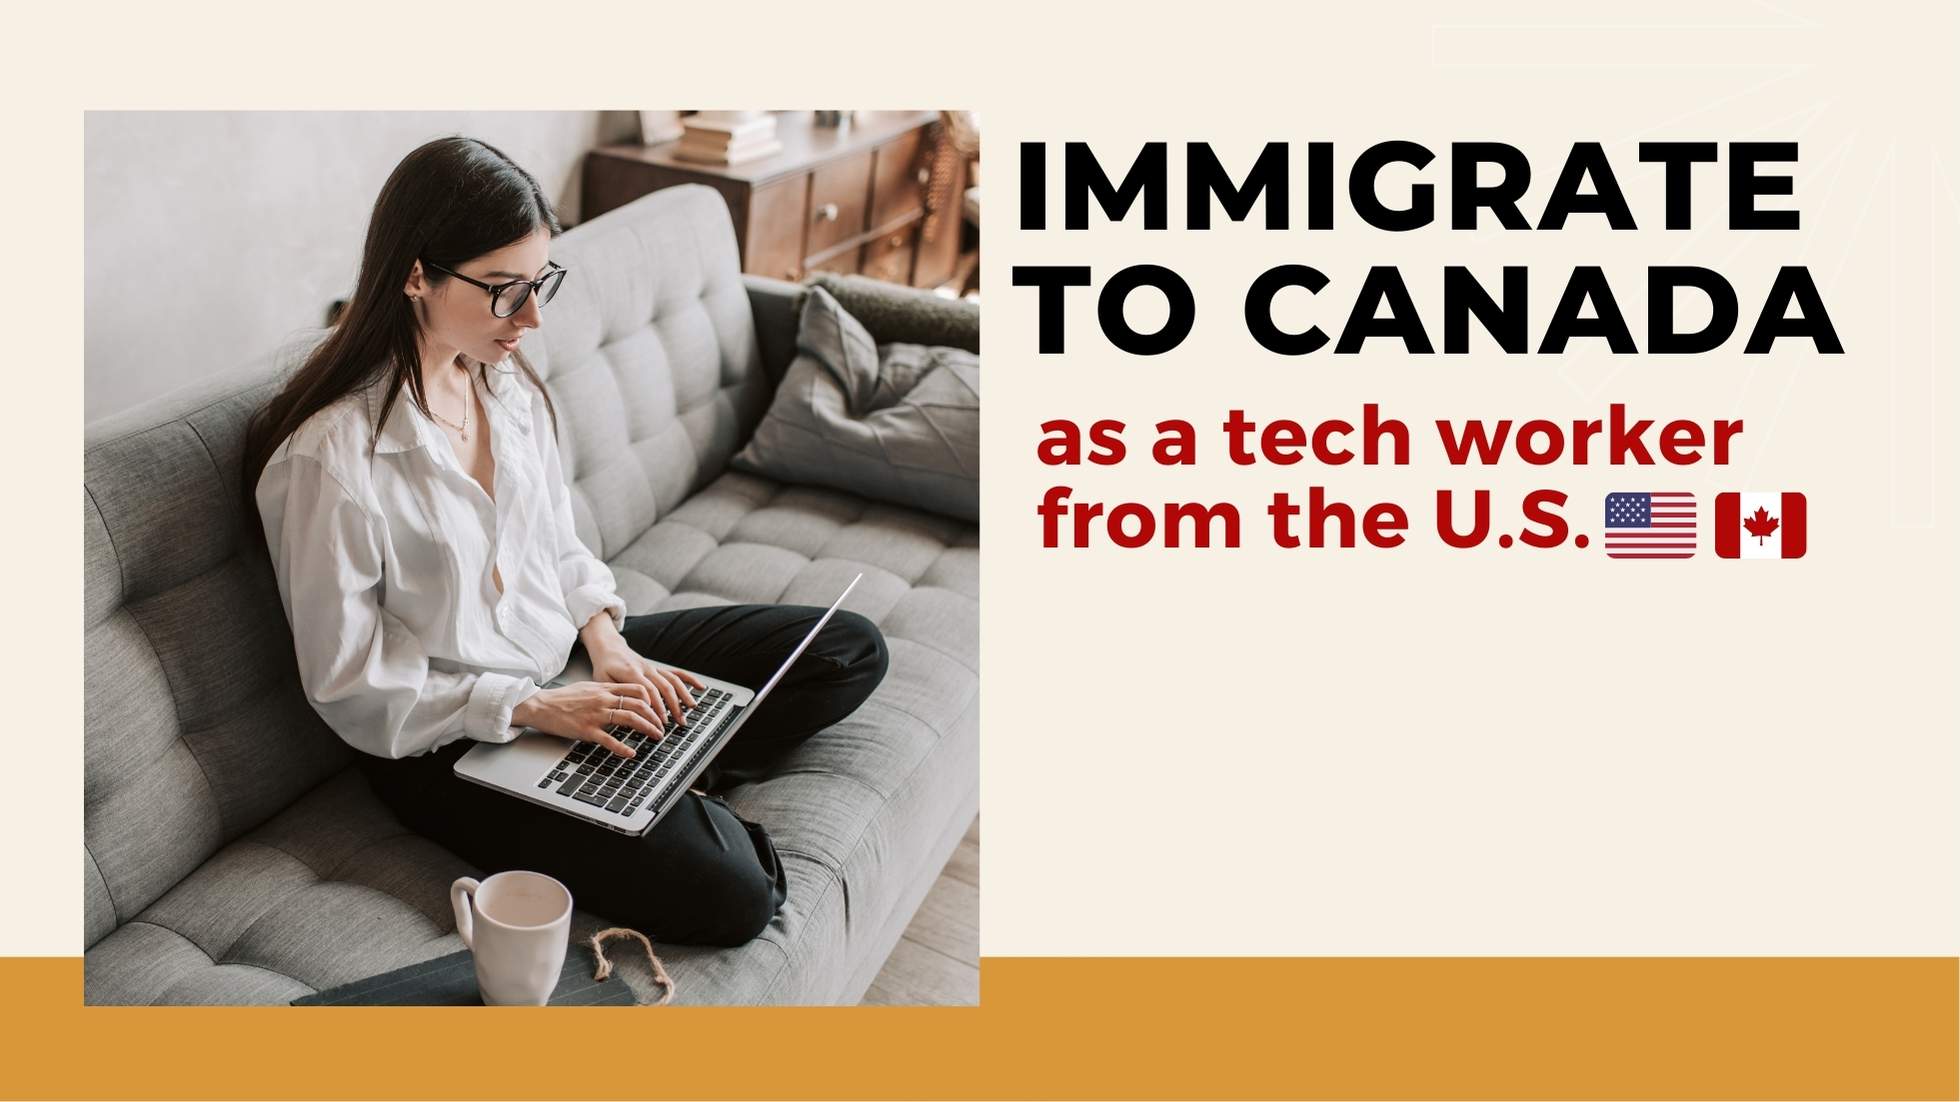 Immigrate to Canada as a tech worker from the U.S.